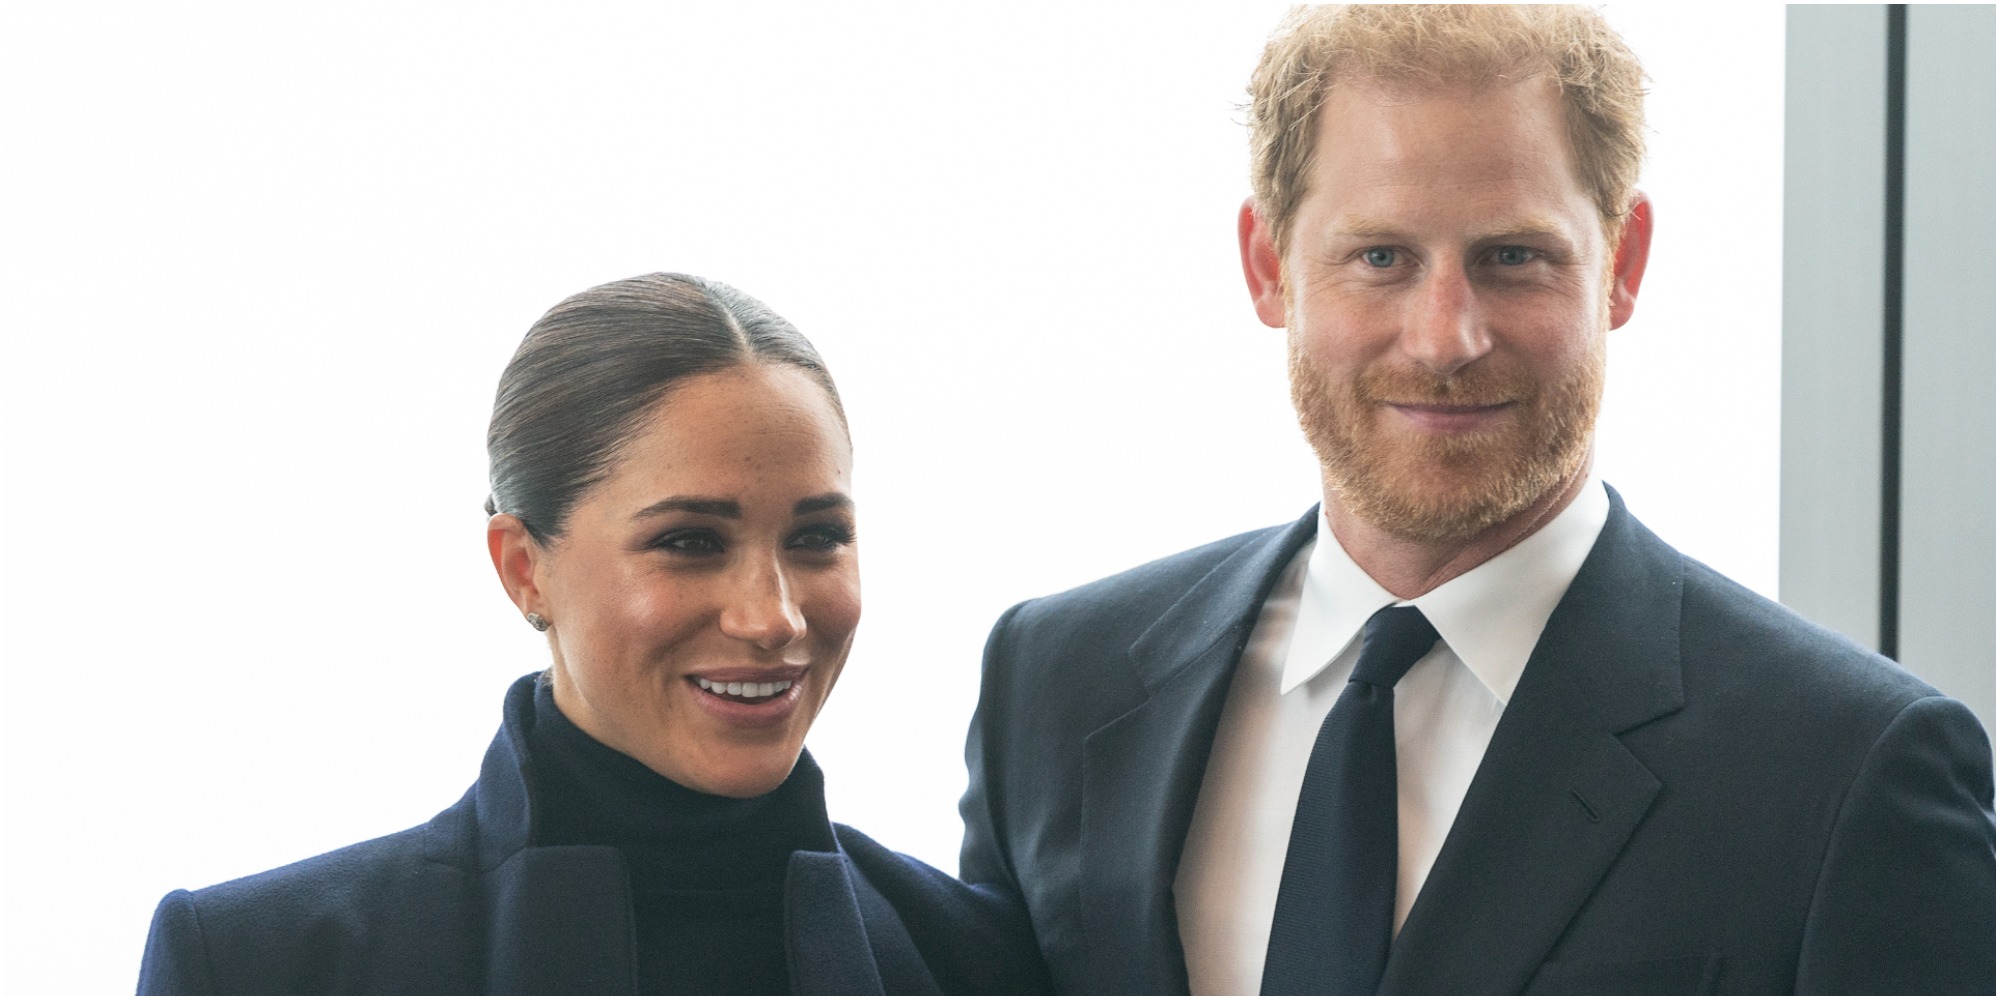 Meghan Markle and Prince Harry visit One World Trade Center in New York City.